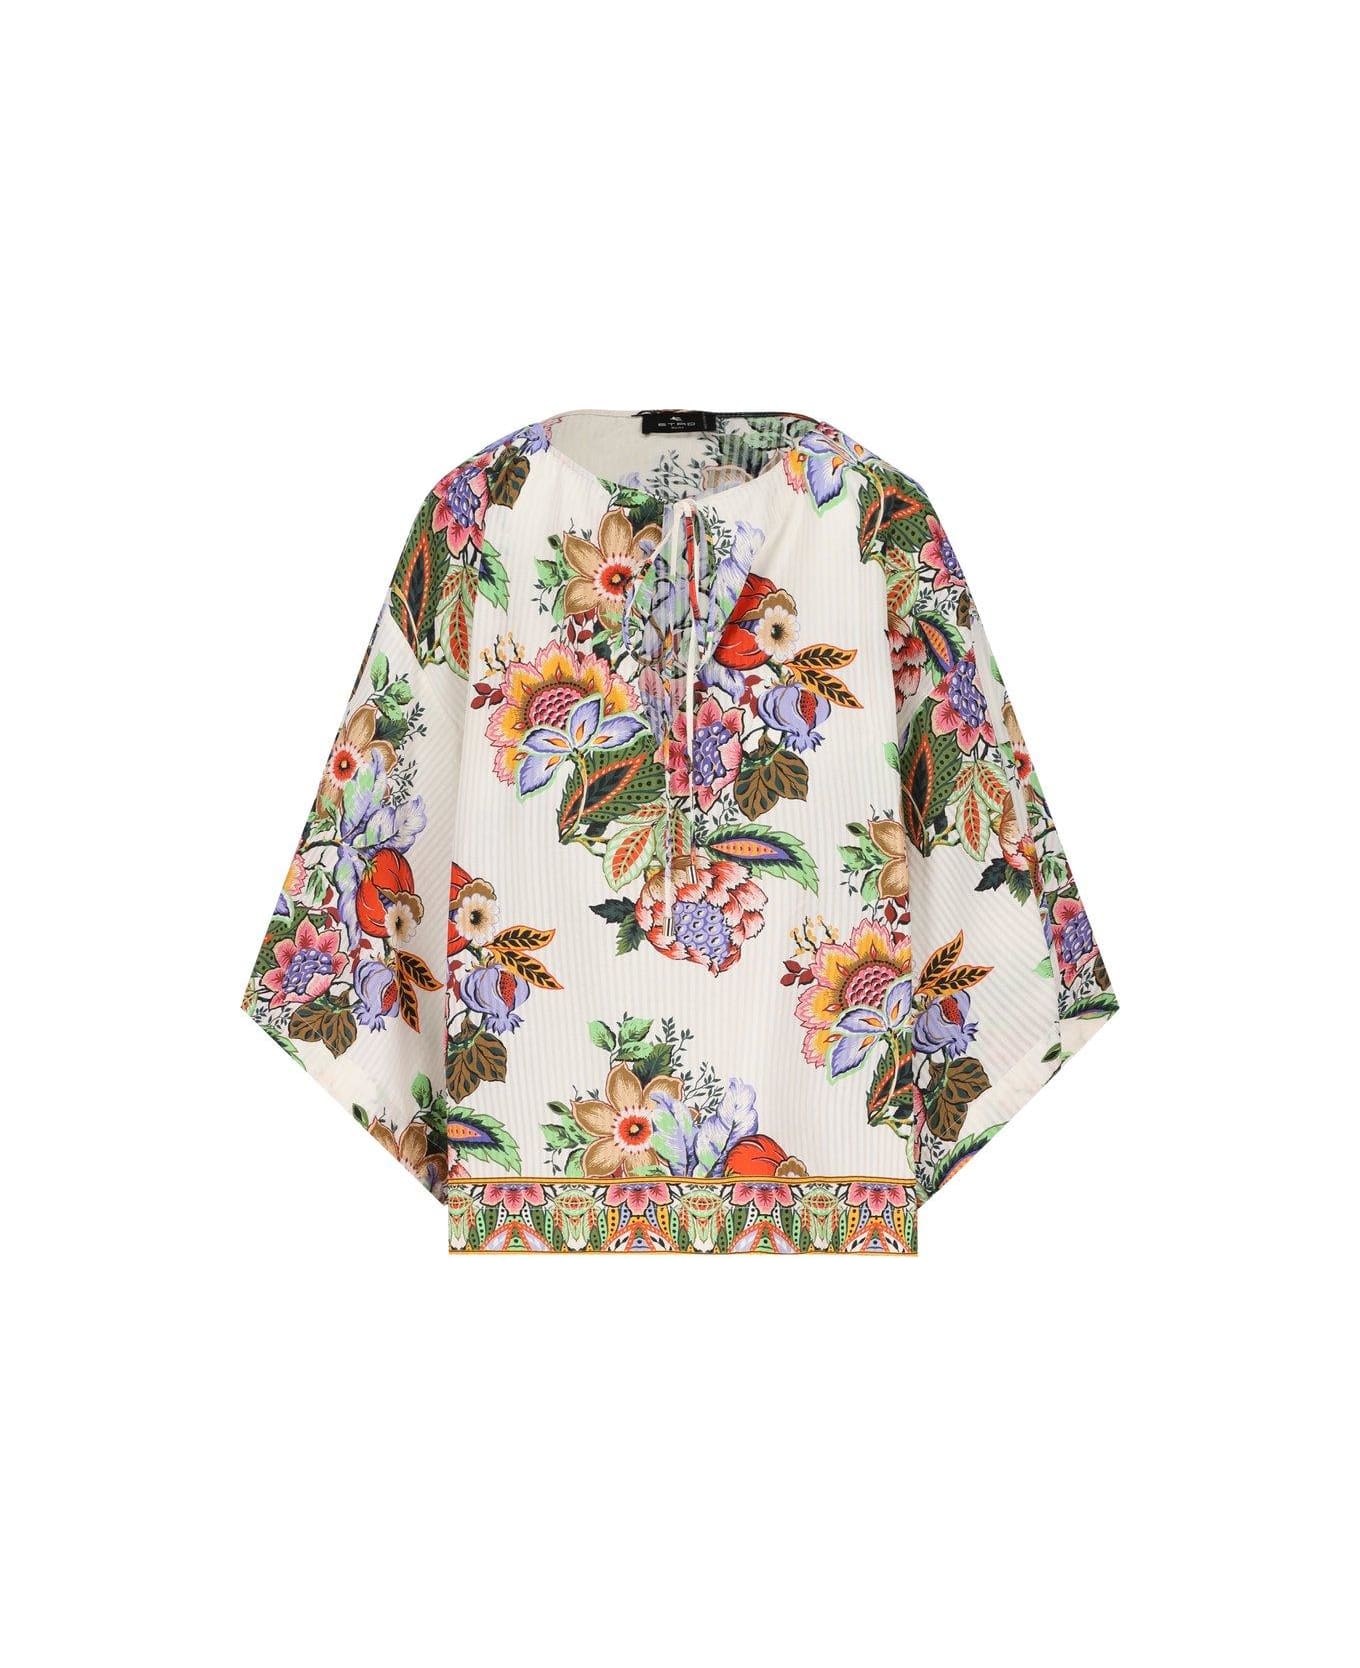 Etro Floral Printed Top - White